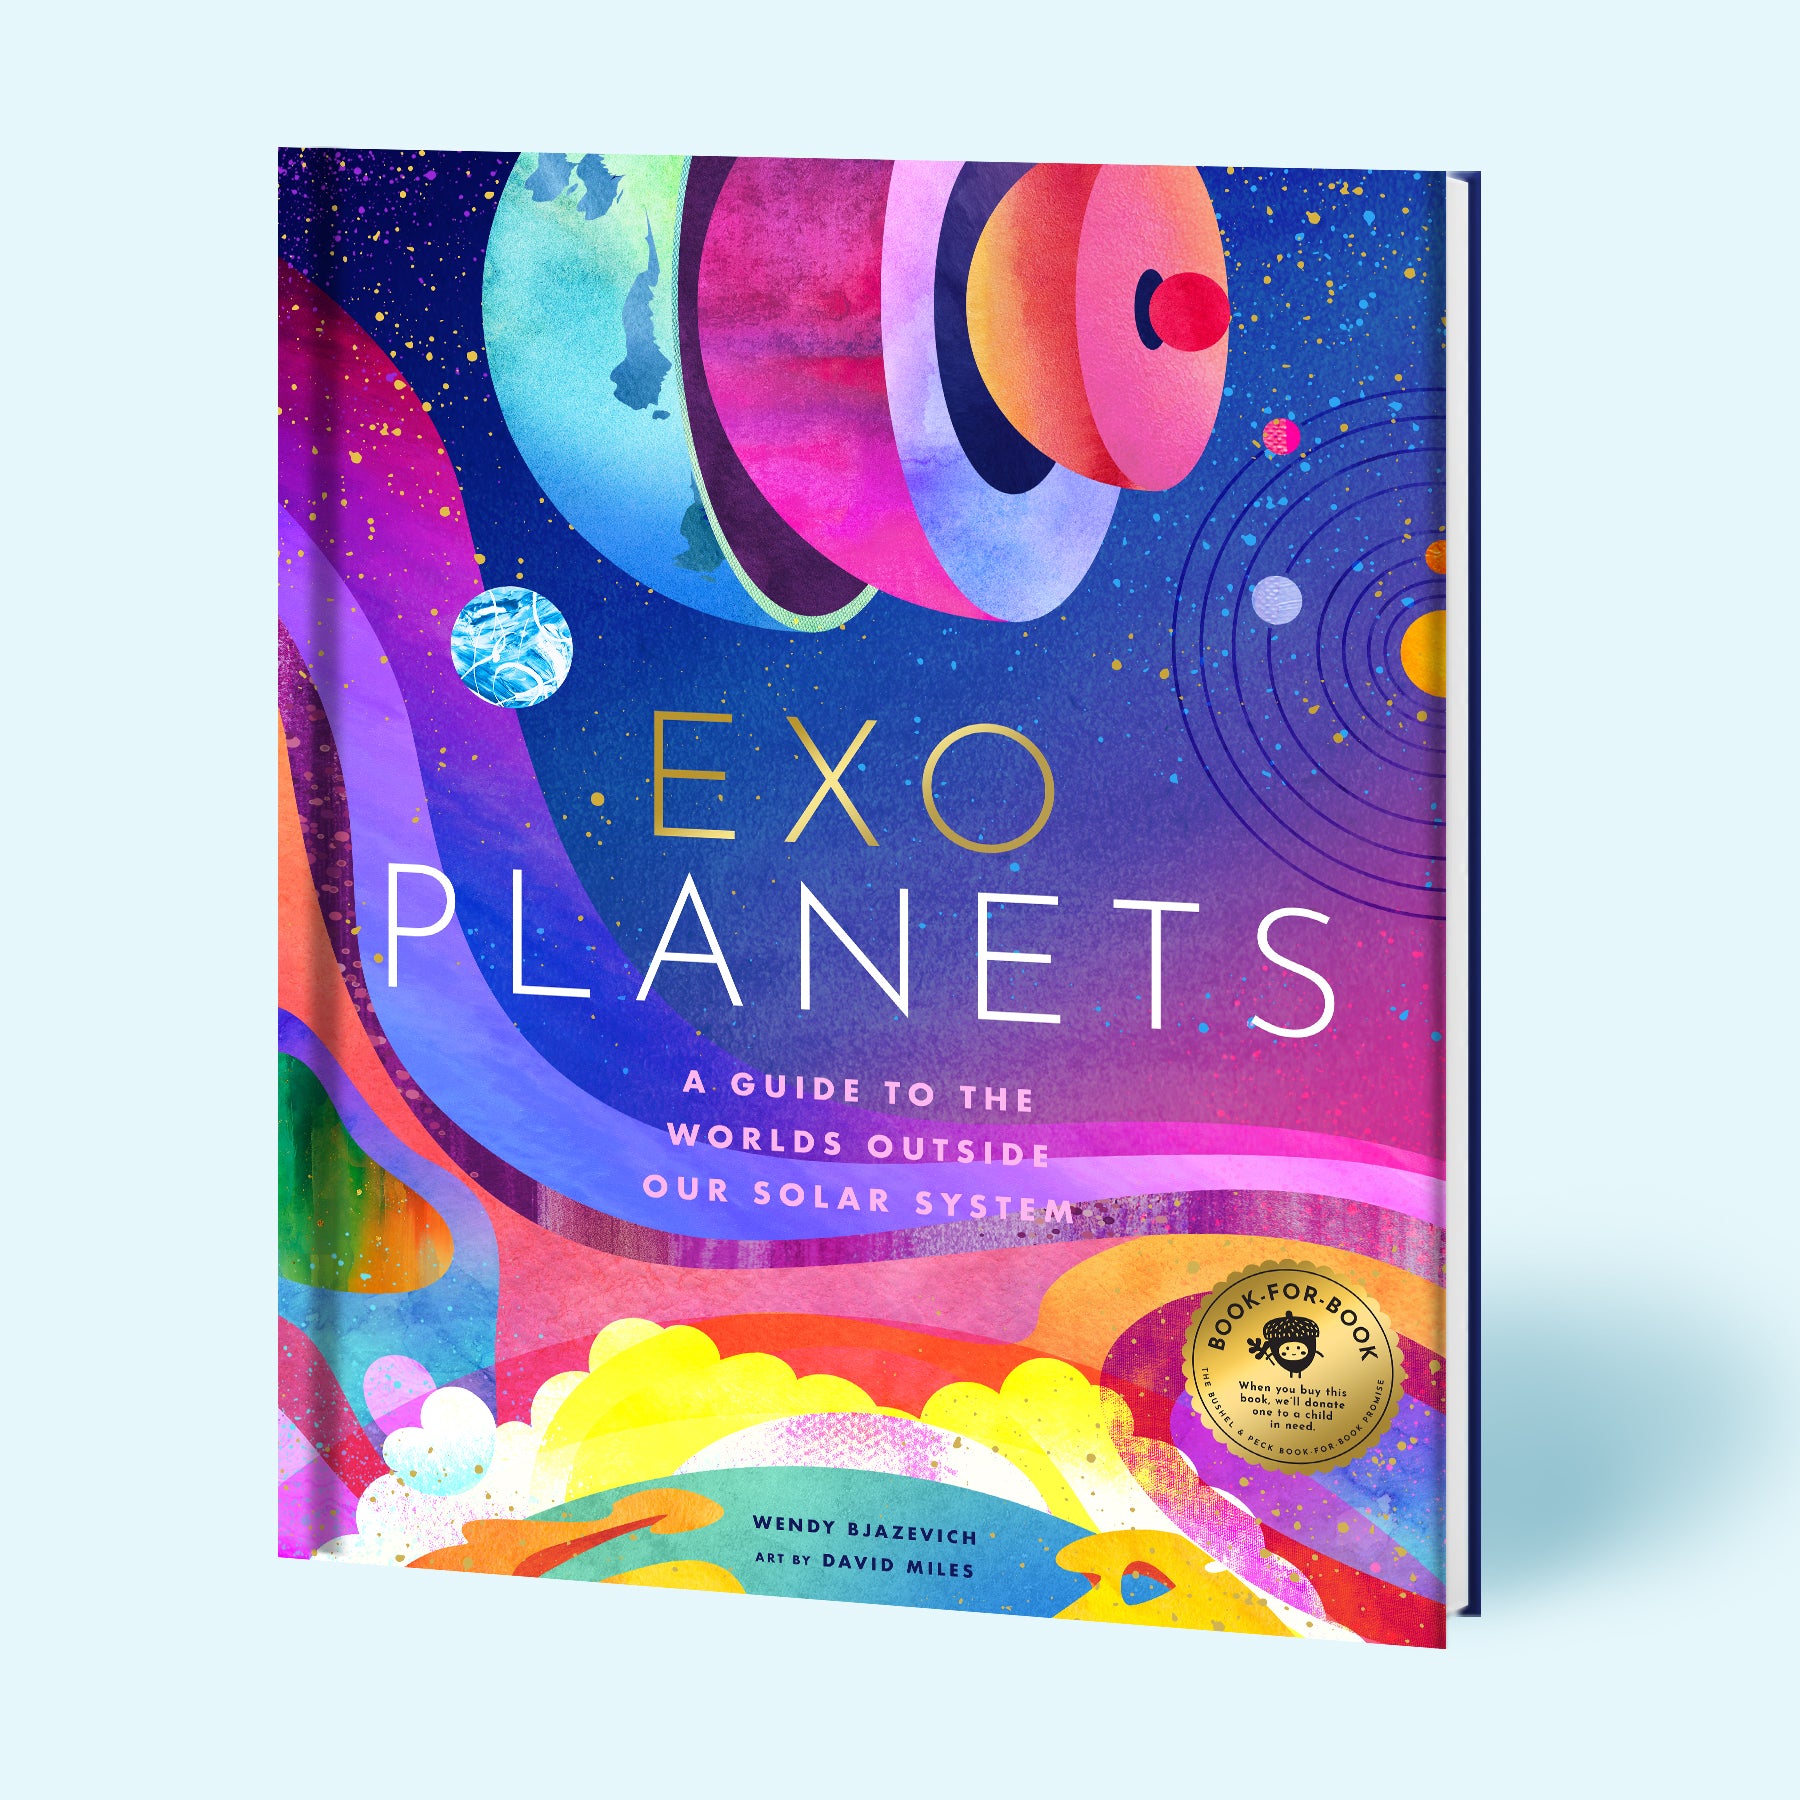 The Little Book of Exoplanets